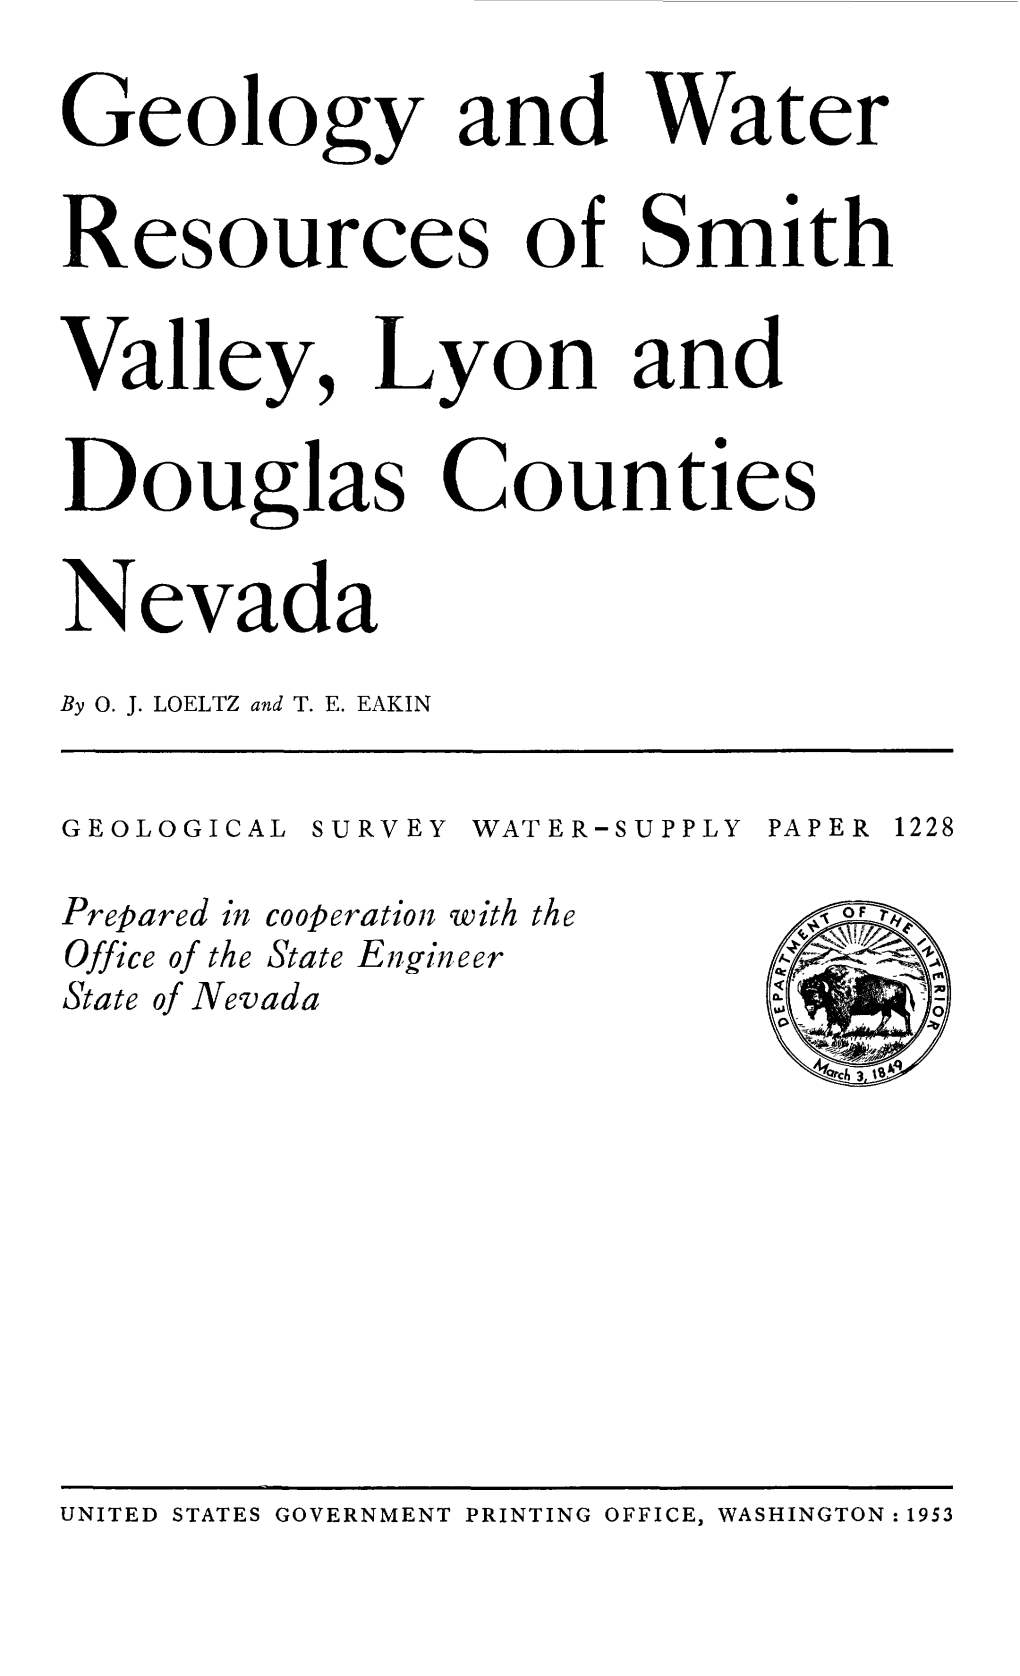 Geology and Water Resources of Smith Valley, Lyon and Douglas Counties Nevada